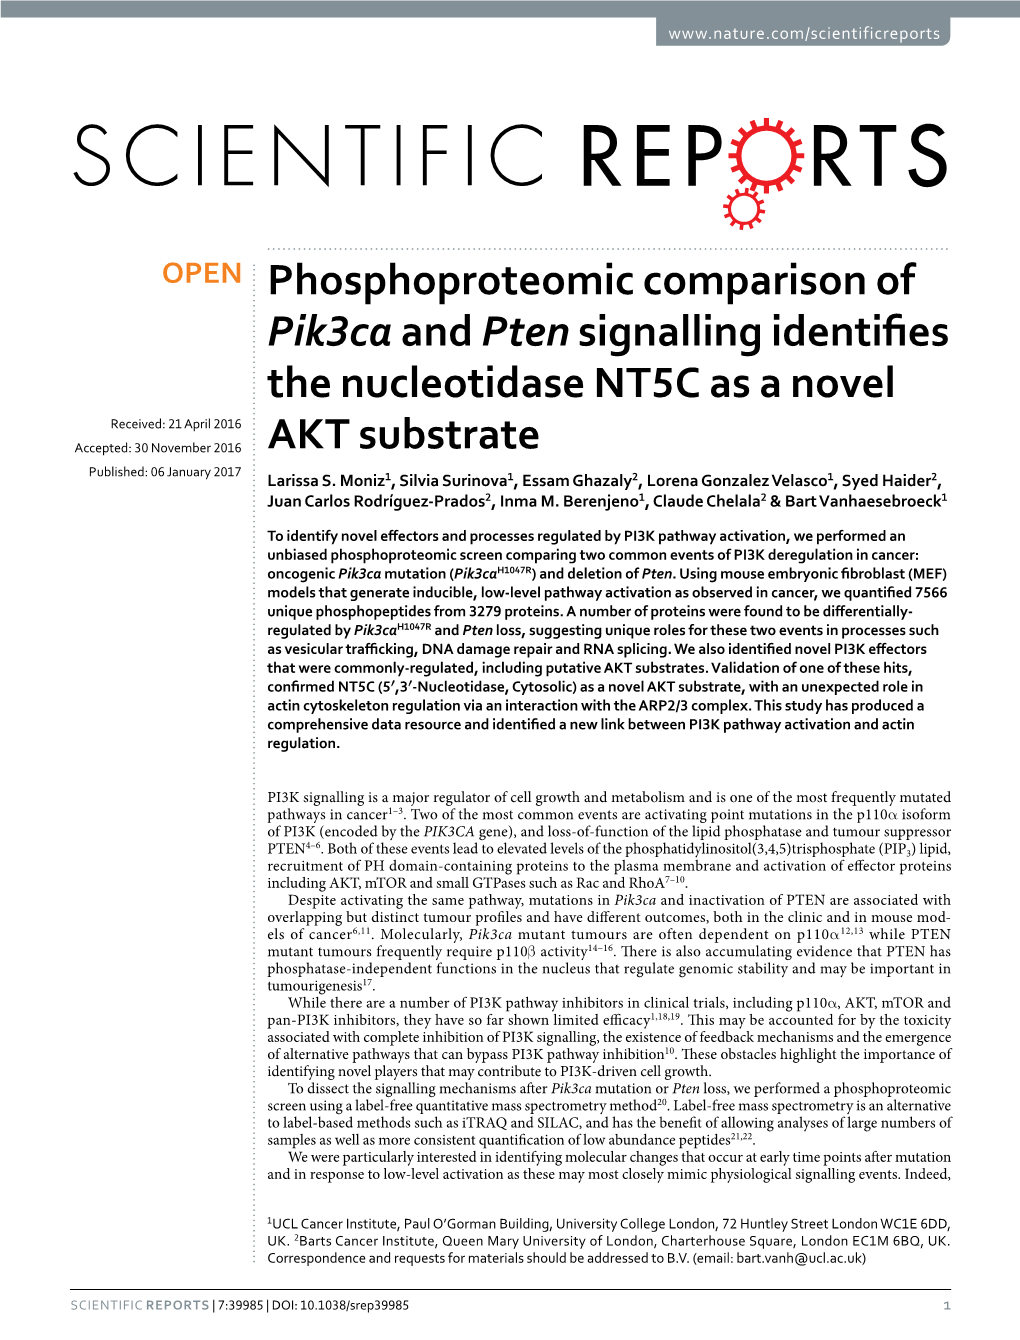 Phosphoproteomic Comparison of Pik3ca and Pten Signalling